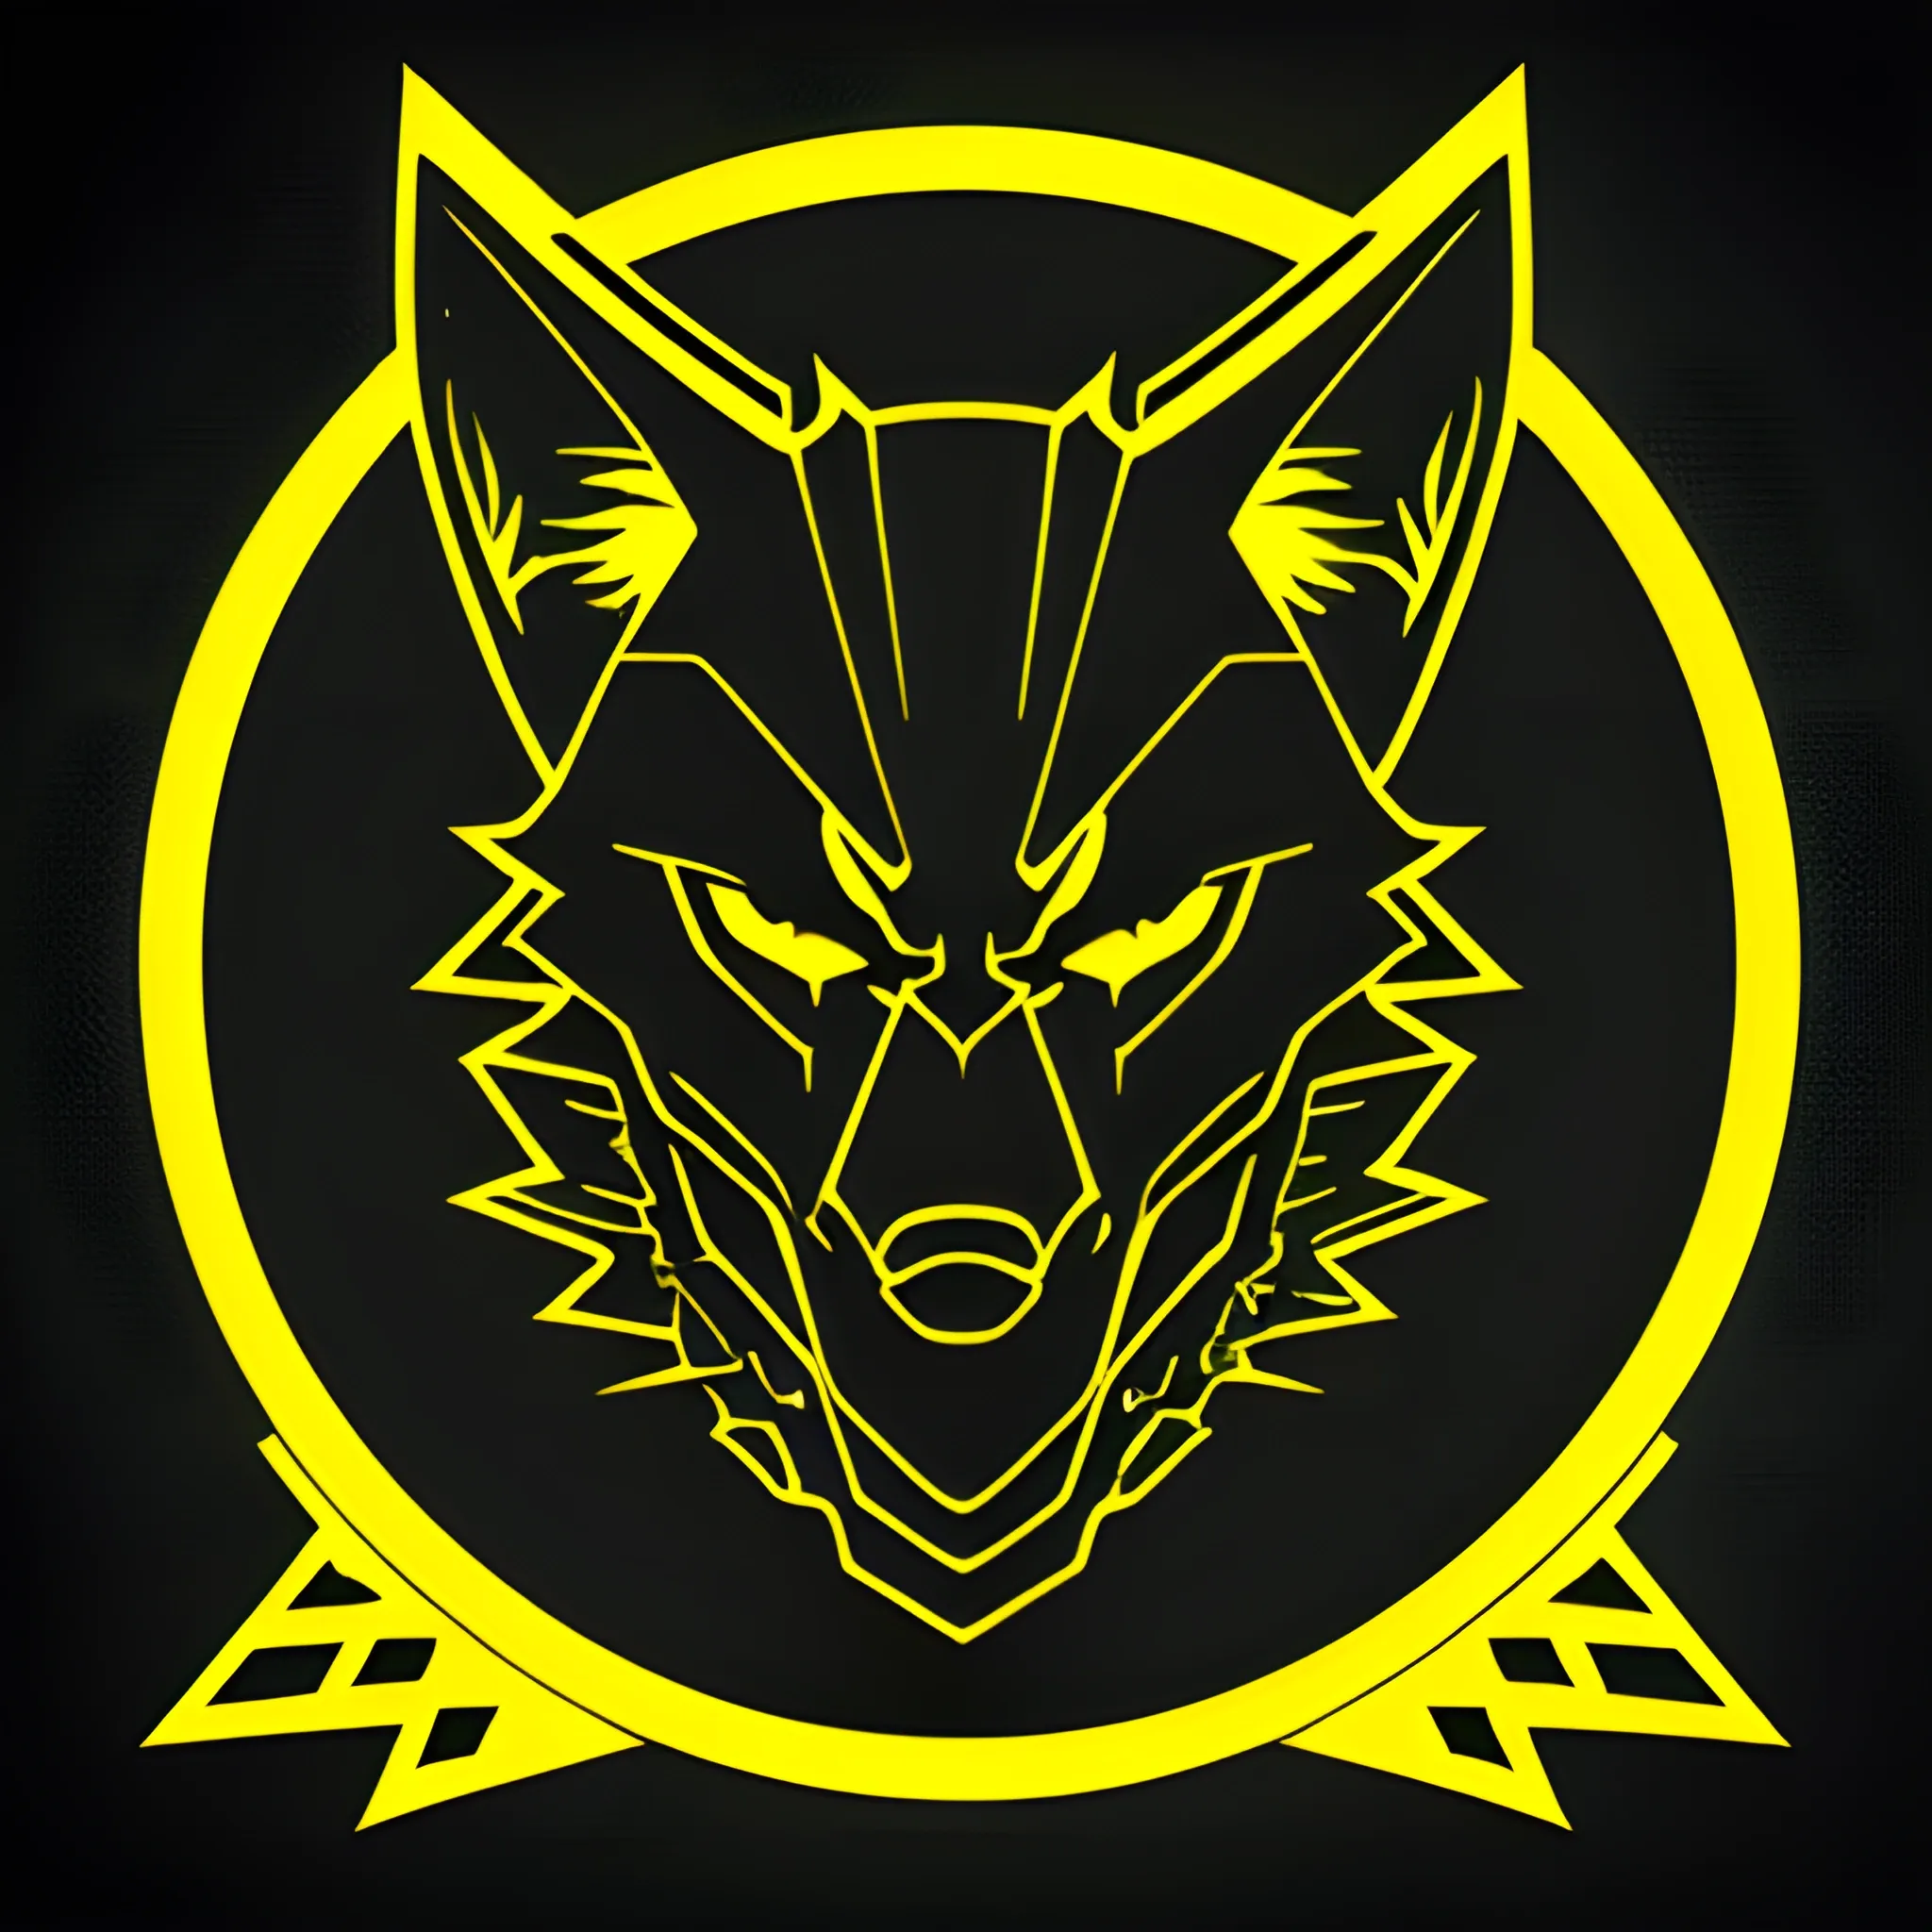 An angry cyberpunk wolf VECTOR logo, using GOLDEN yellow color, WITH BASKETBALL THEME.
